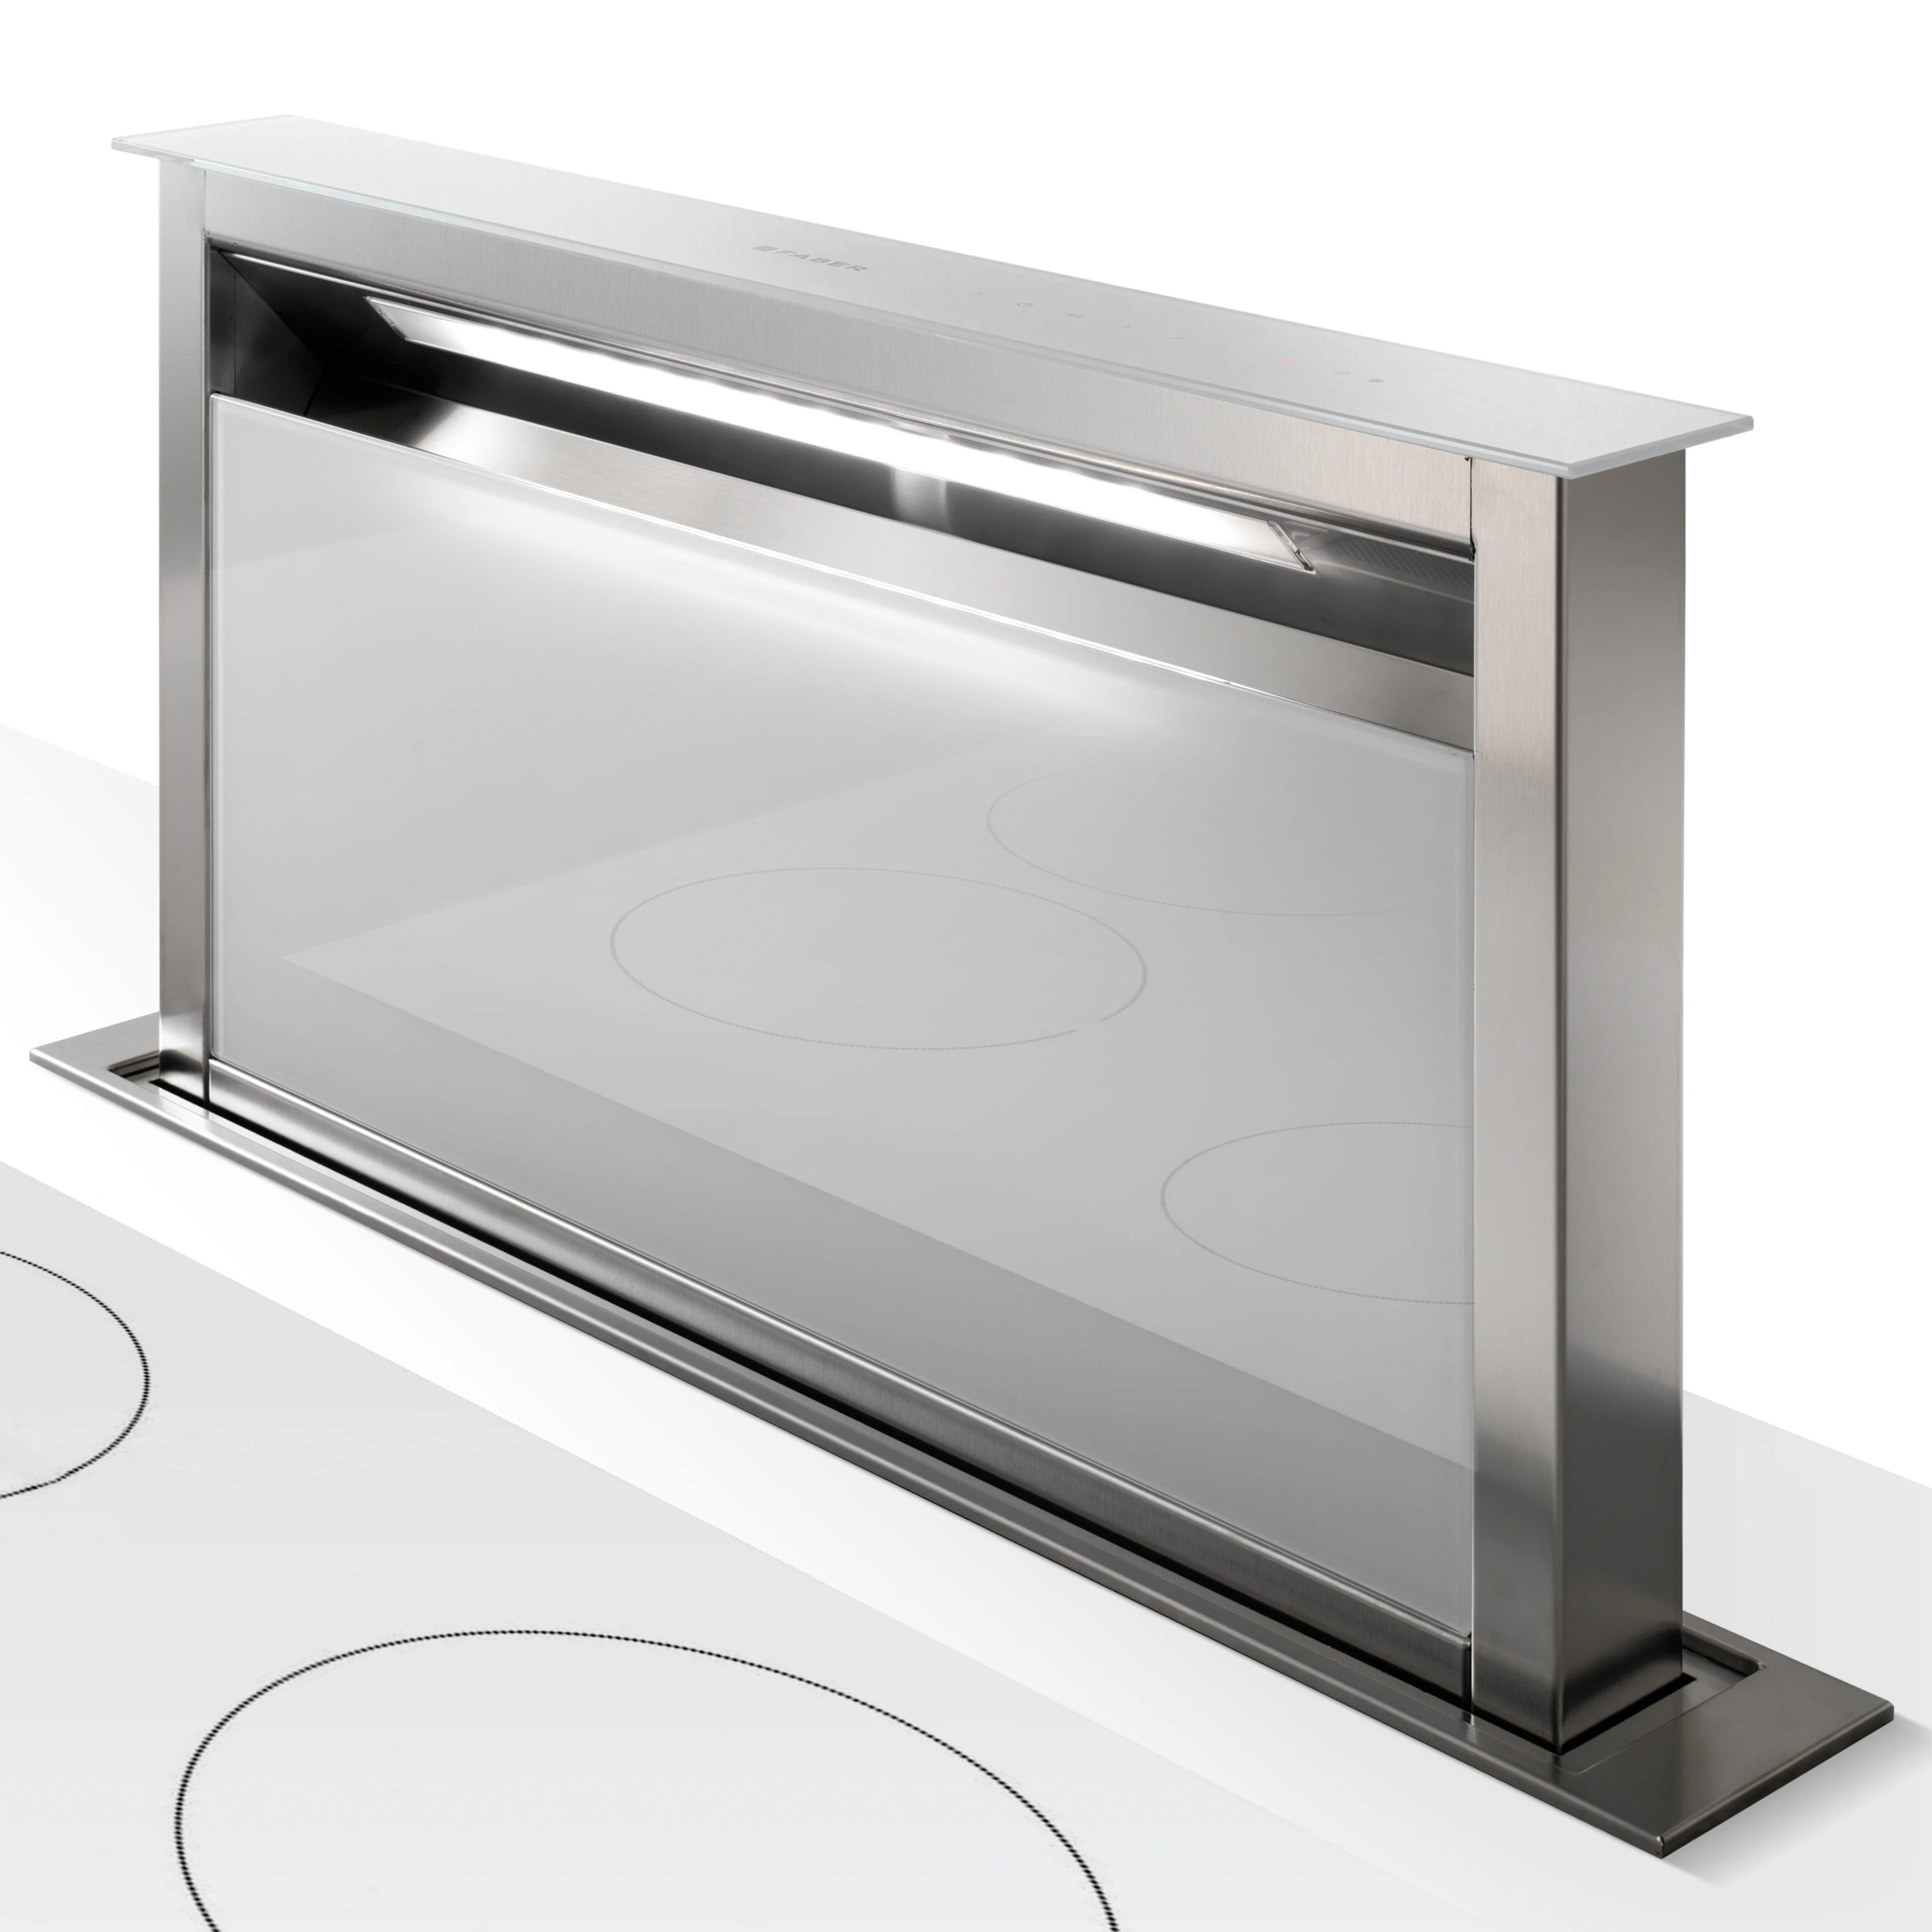 Faber - 36 Inch 600 CFM Scirocco Lux Downdraft Vent in Stainless - SCLX3615SSNB-B